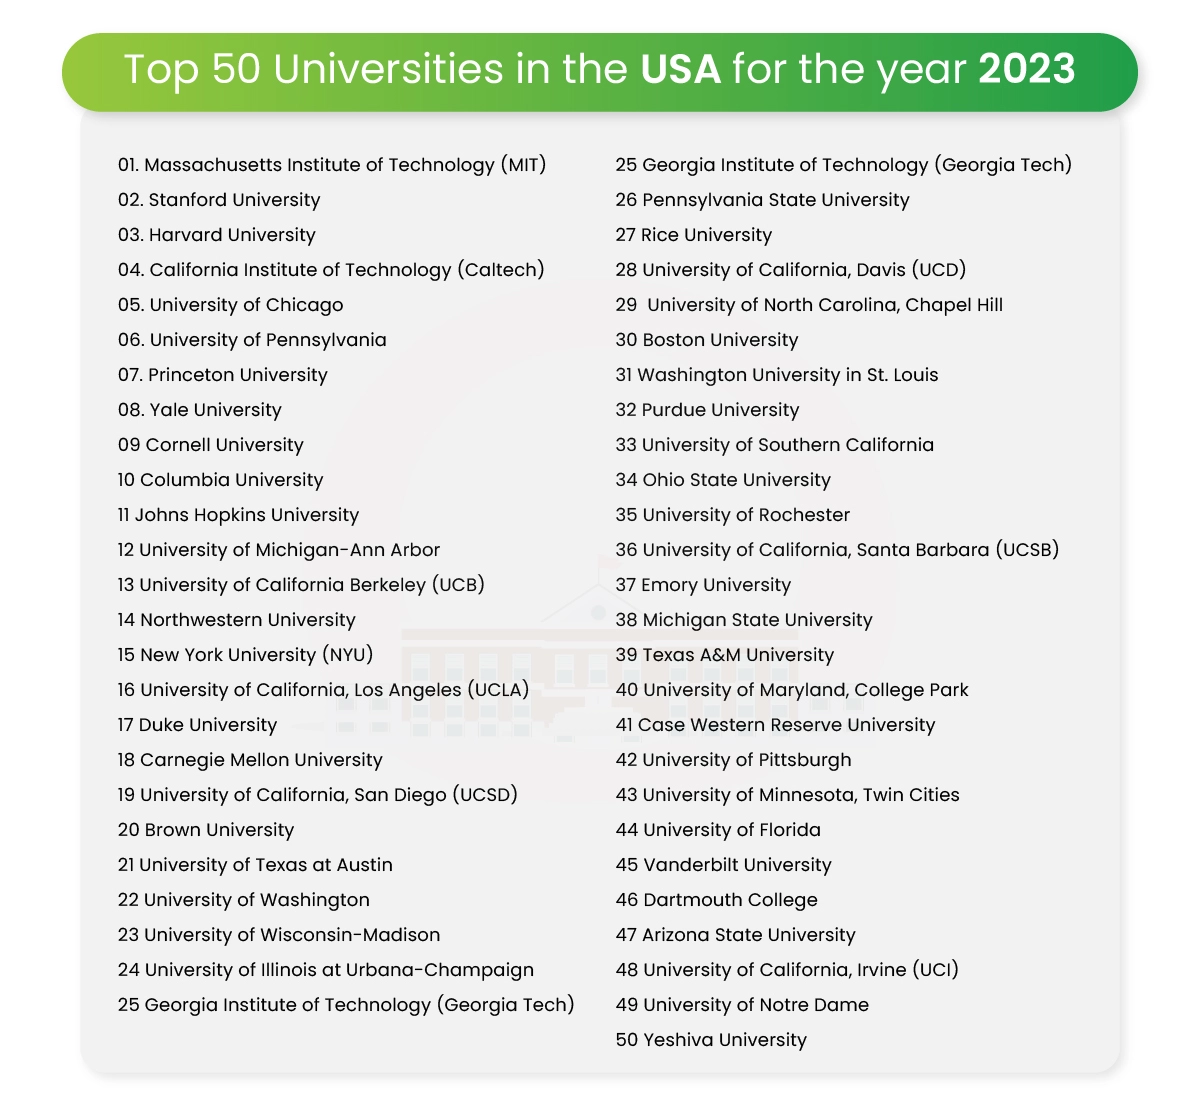 Top Universities in the USA for the year 2023